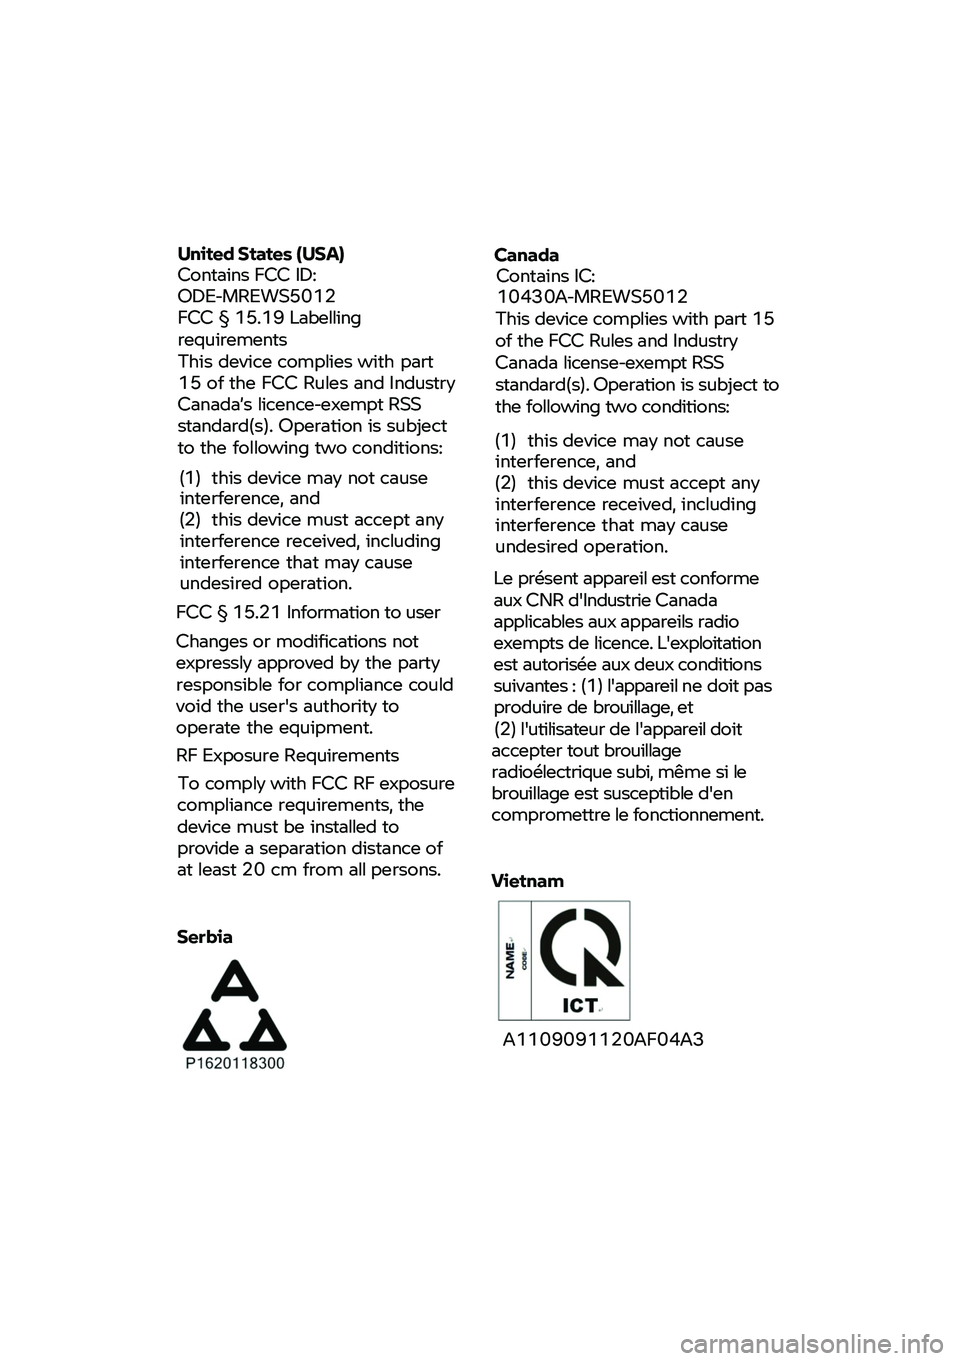 BMW MOTORRAD F 850 GS 2021  Handleiding (in Dutch)  
 
 
 
United States (USA) Contains FCC ID: ODE-MREWS5012 FCC § 15.19 Labelling requirements This device complies with part 15 of the FCC Rules and Industry Canada’s licence-exempt RSS standard(s)